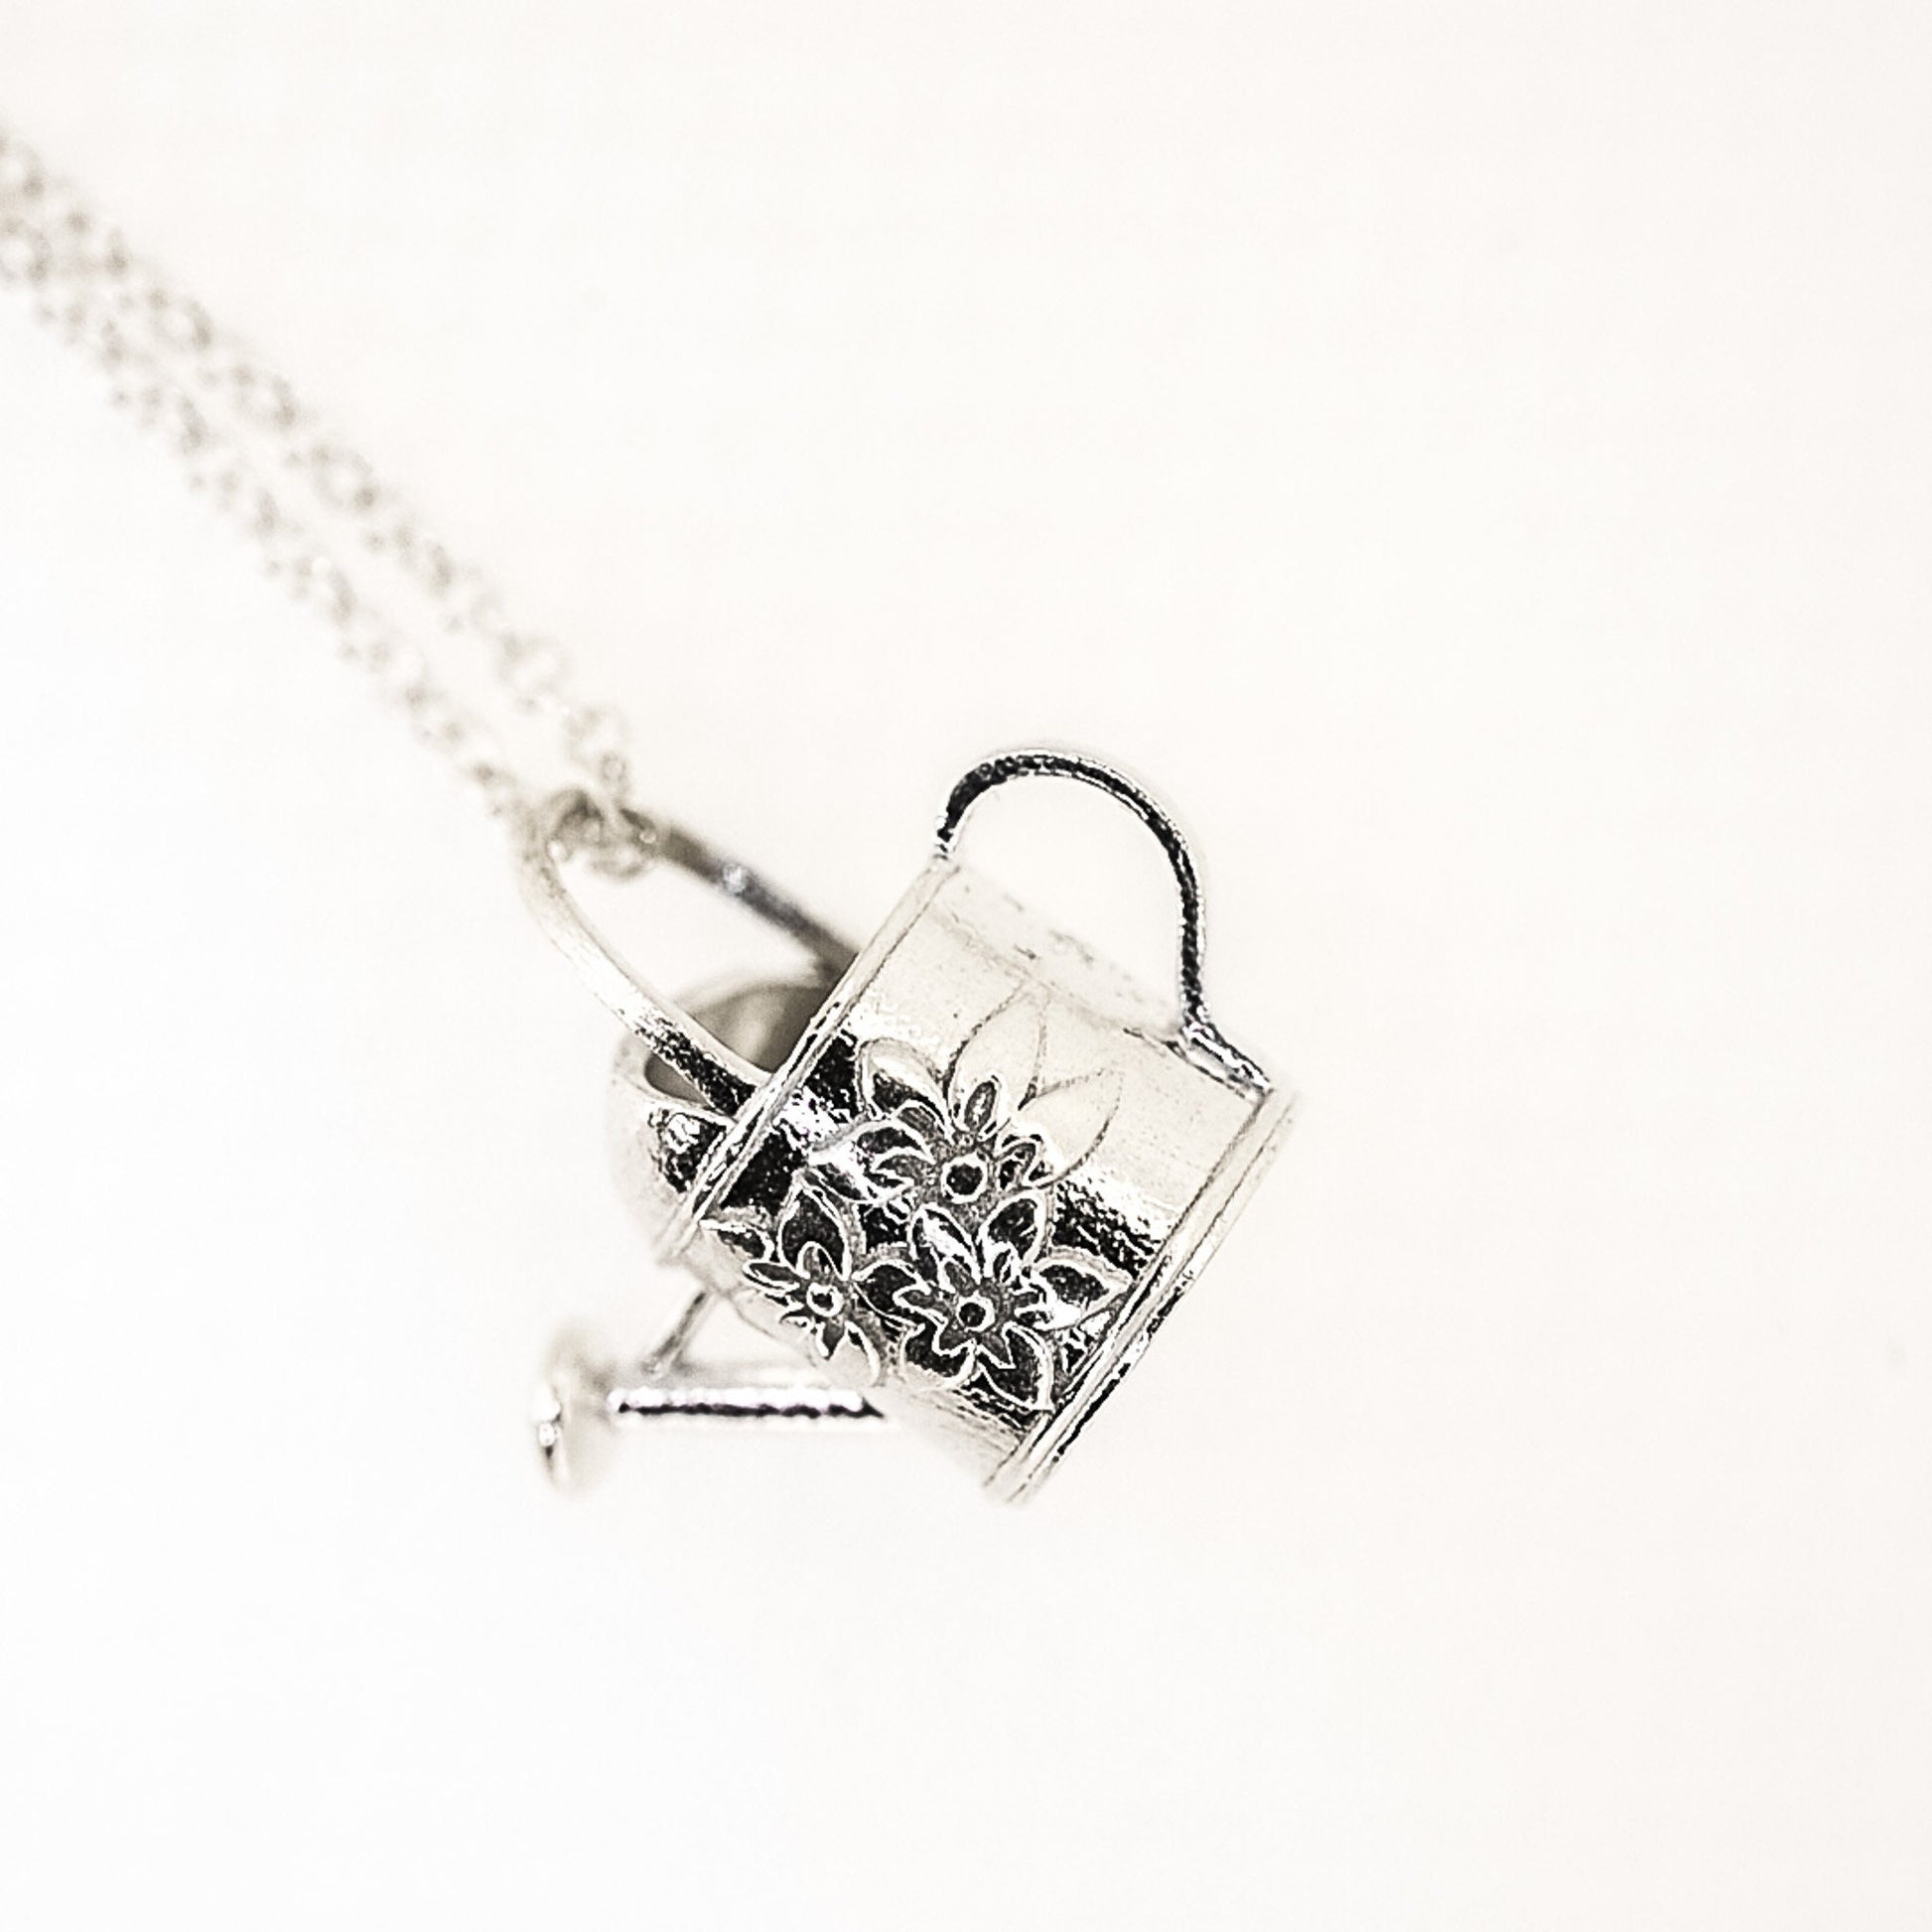 Watering Can, with flowers, old-fashioned vintage inspired gardener's necklace in solid silver